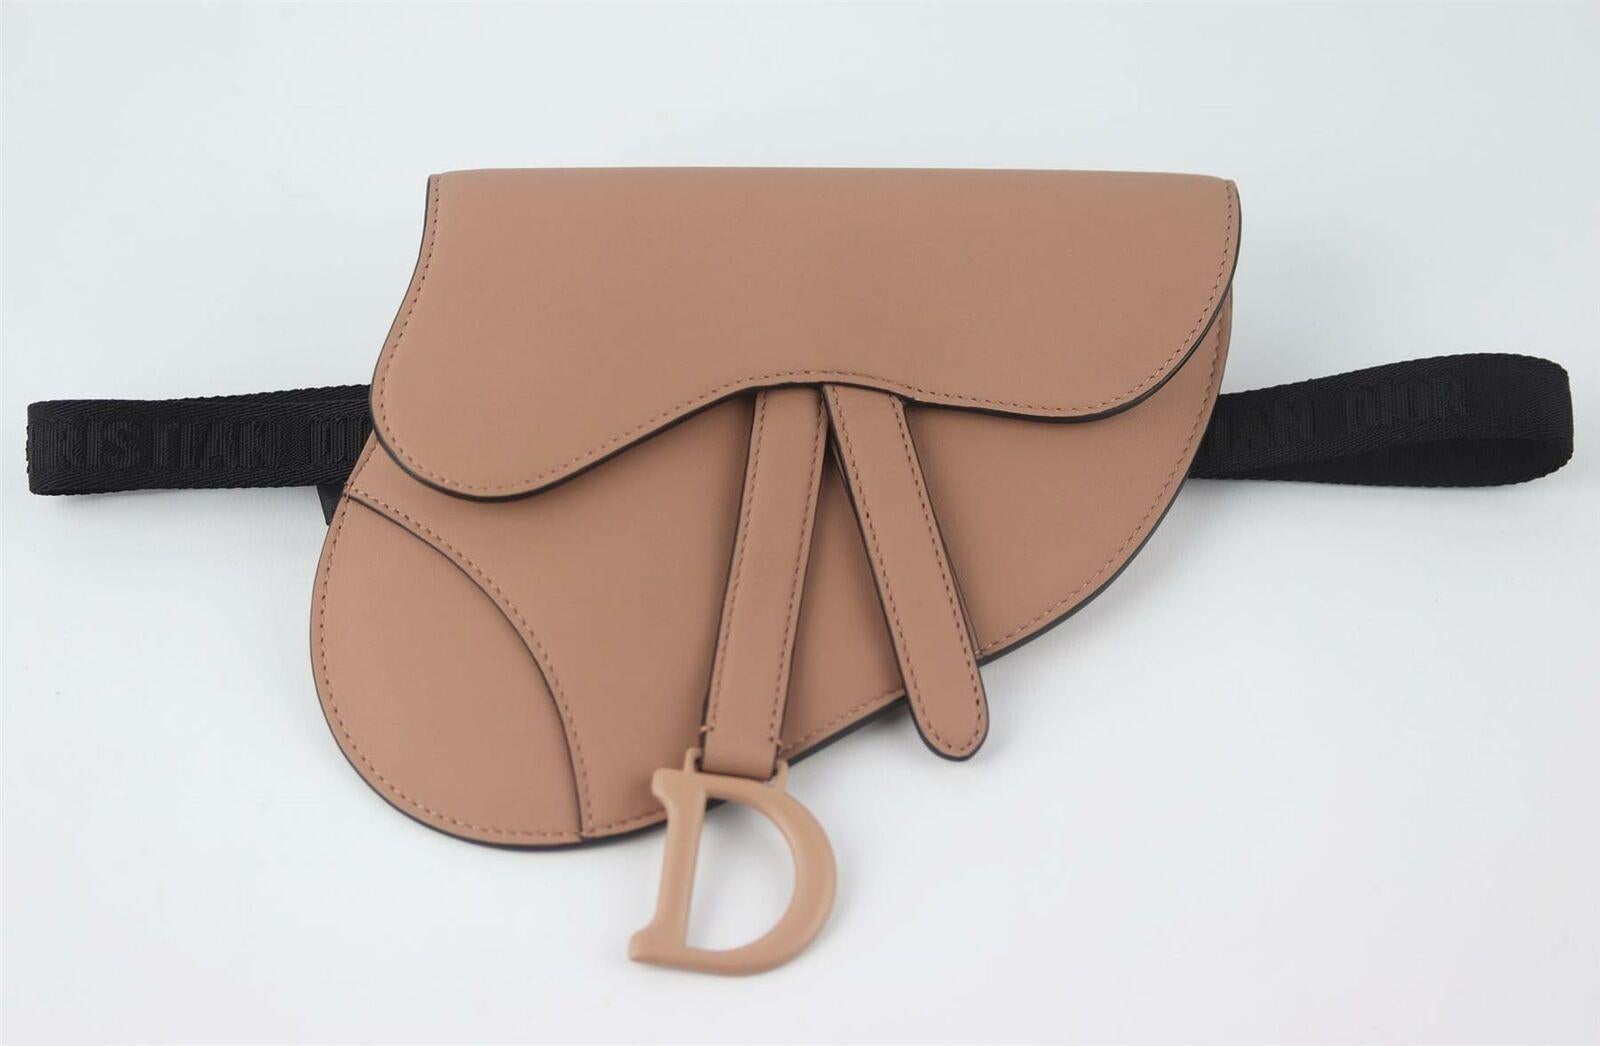 Made in Italy, this beautiful Christian Dior 'Saddle' belt bag has been made from blushed powdder matte calfskin exterior with matching blushed suede interior, this piece is decorated with Dior's pink matte finish hardware on the front and back and